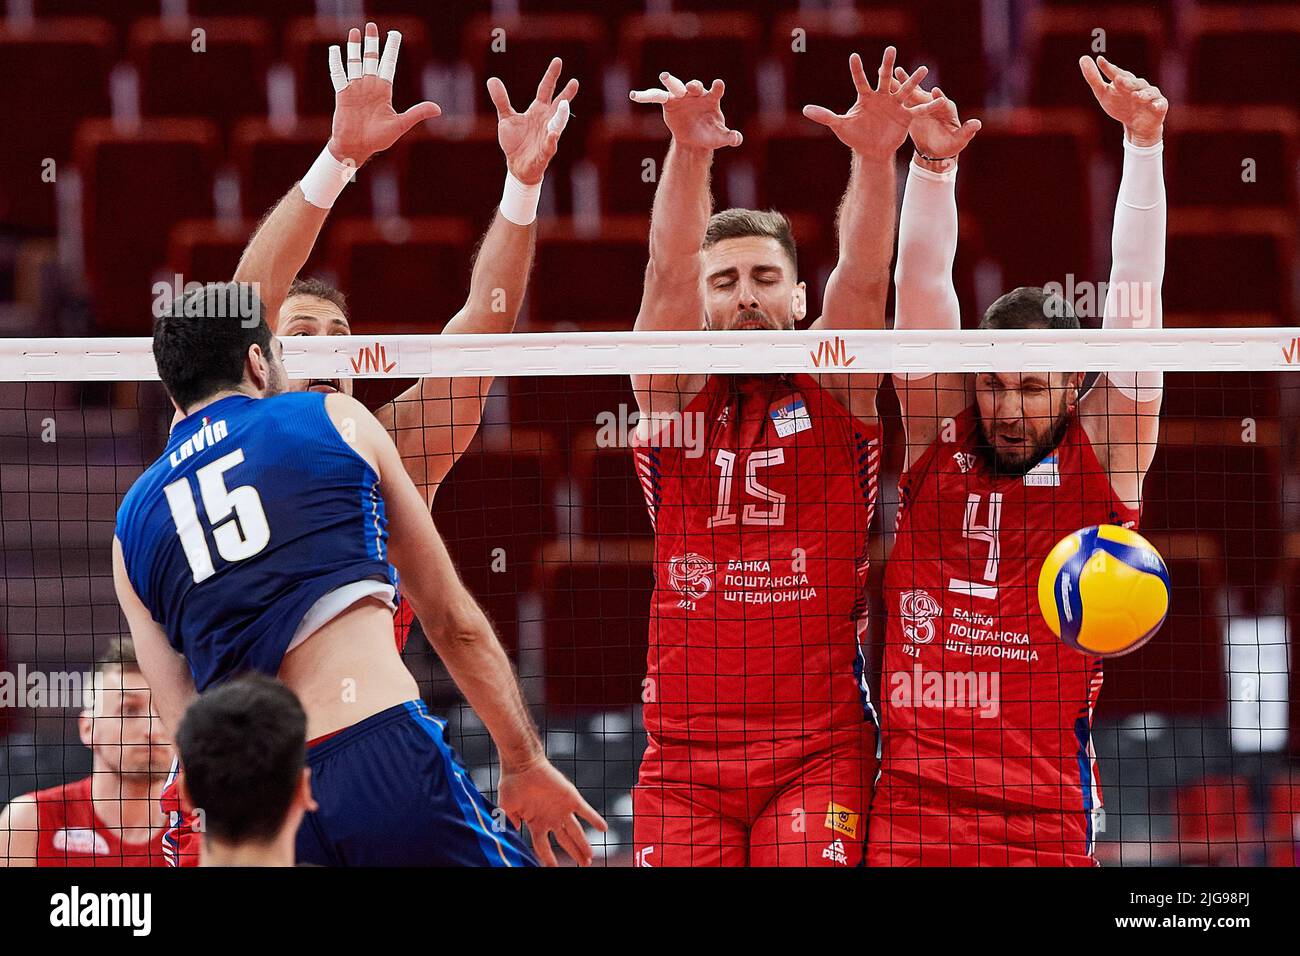 Gdansk, Poland. 08th July, 2022. Daniele Lavia (L) and Nemanja Petric (R) from Italy in action against Nemanja Masulovic (2R) from Serbia during the 2022 men's FIVB Volleyball Nations League match between Italy and Serbia in Gdansk, Poland, 08 July 2022. Credit: PAP/Alamy Live News Stock Photo